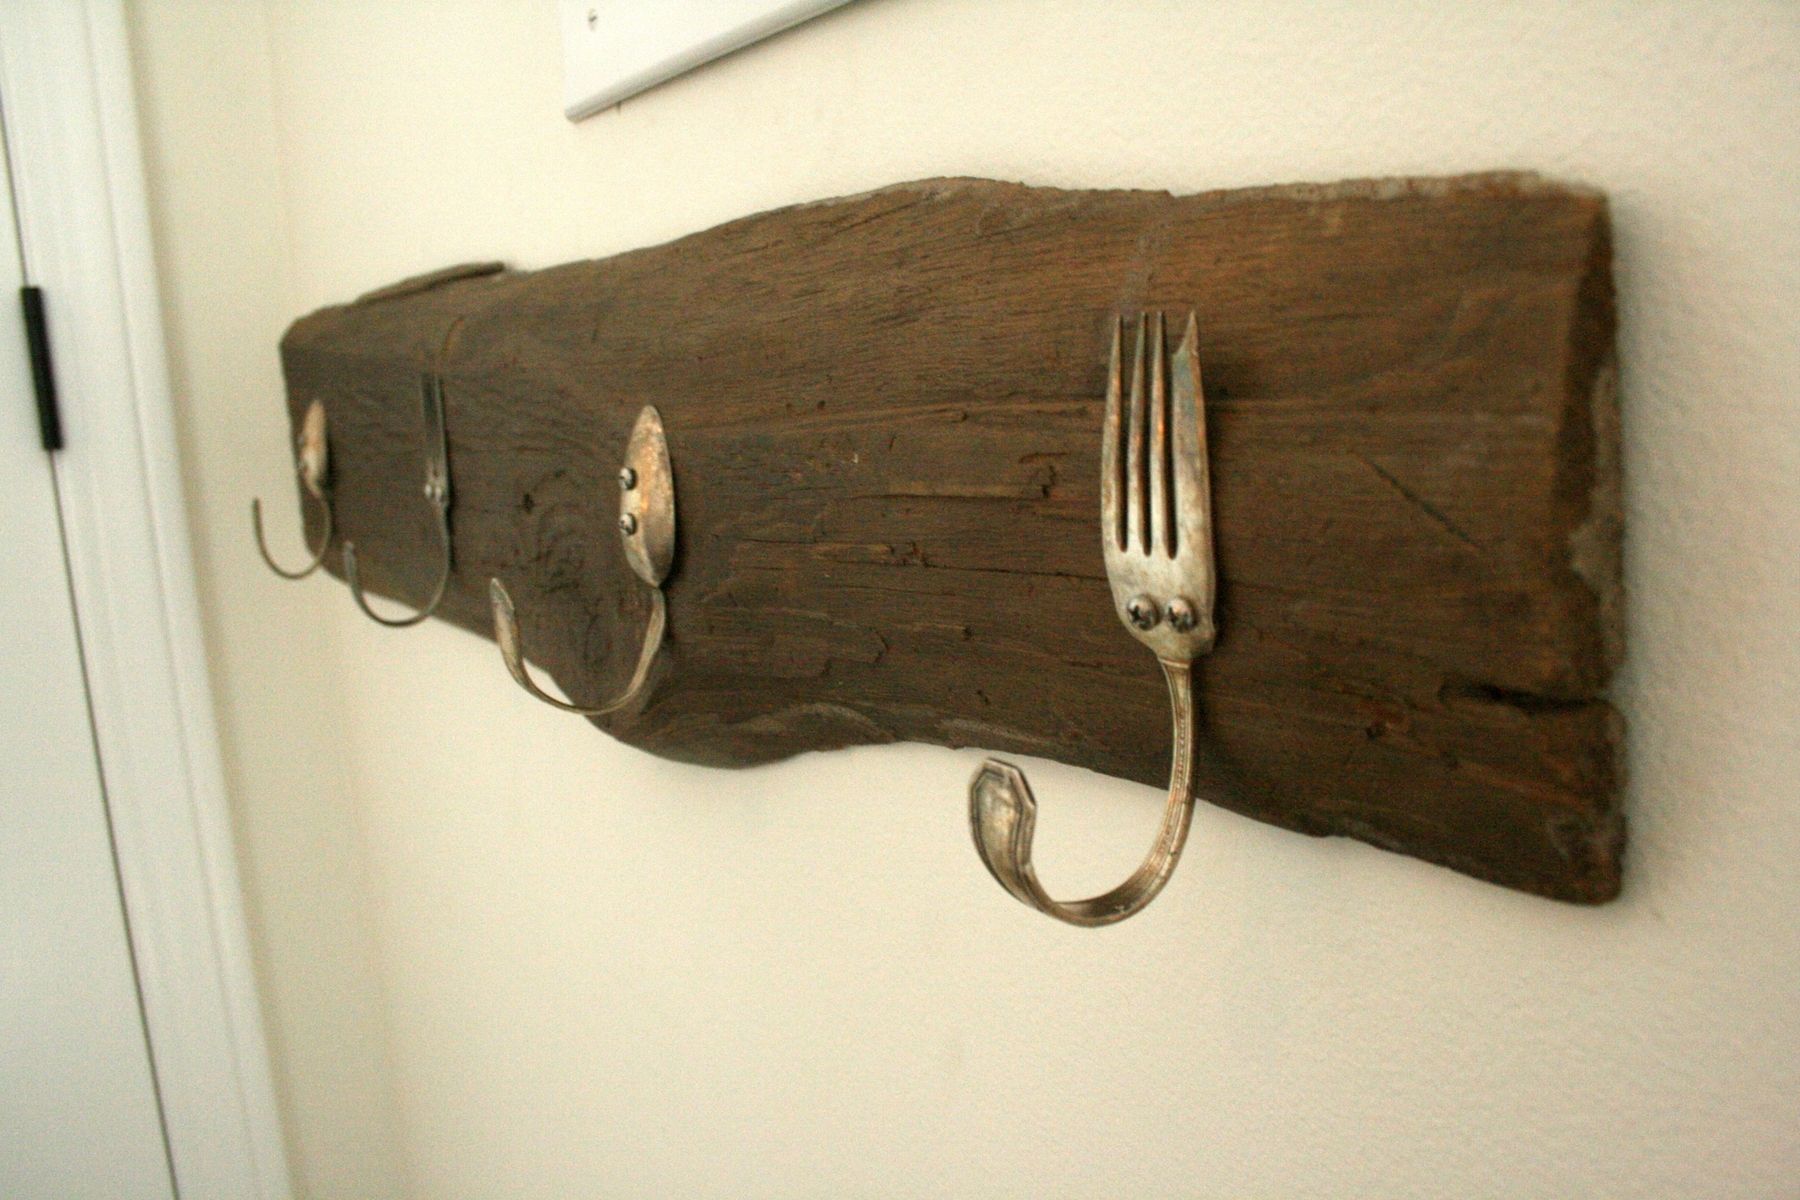 Hand Crafted Vintage Silverware Coat Hook by Knot 2 Shabby